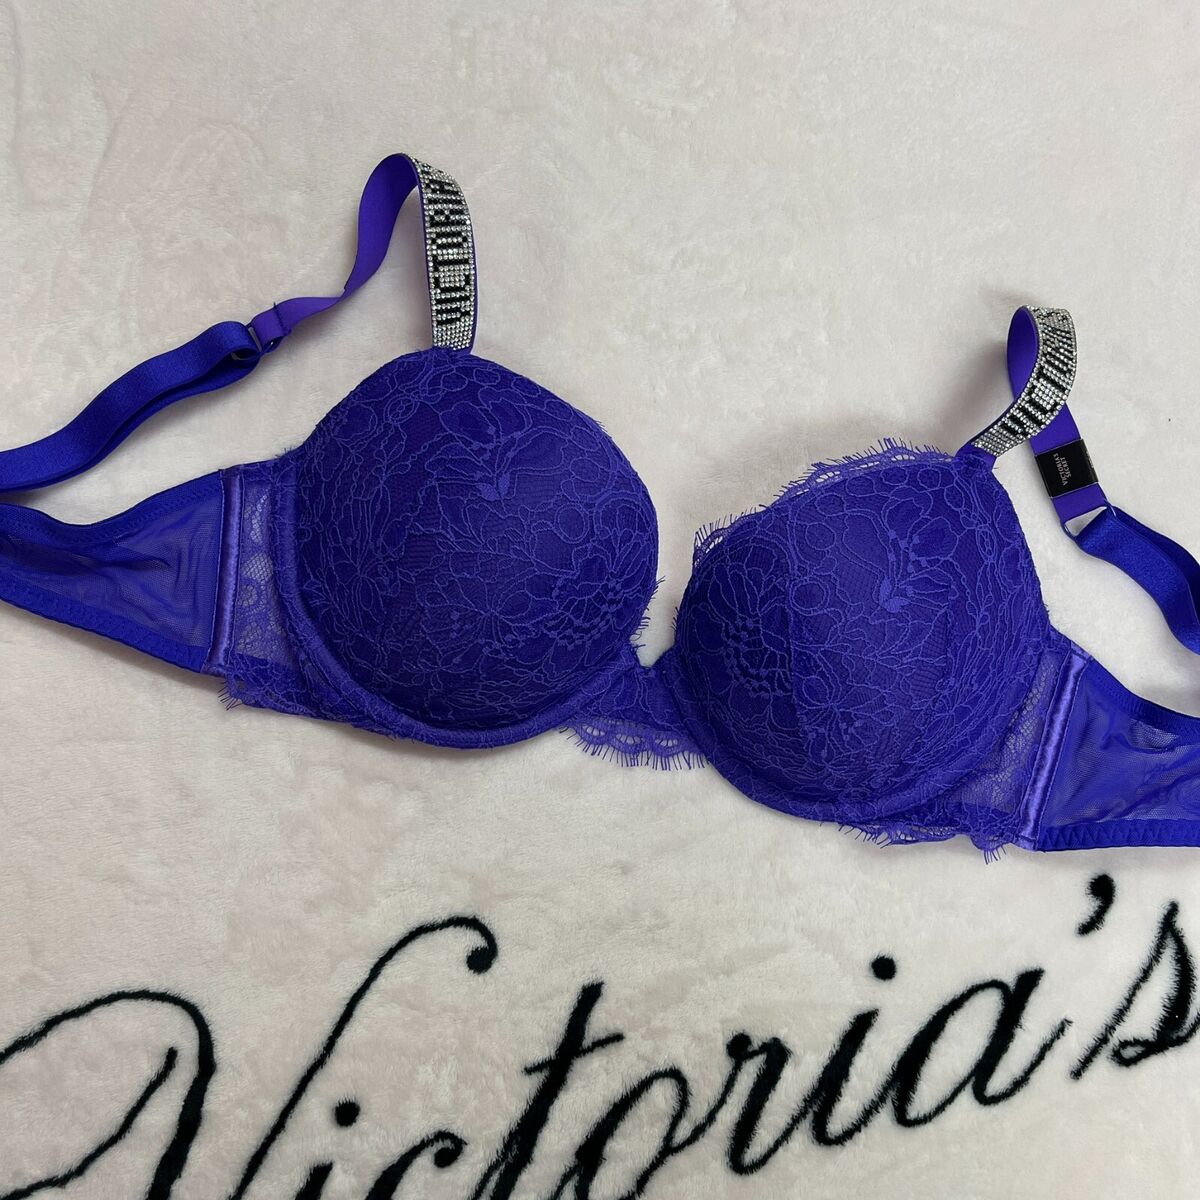 All Blue Push Up Bras